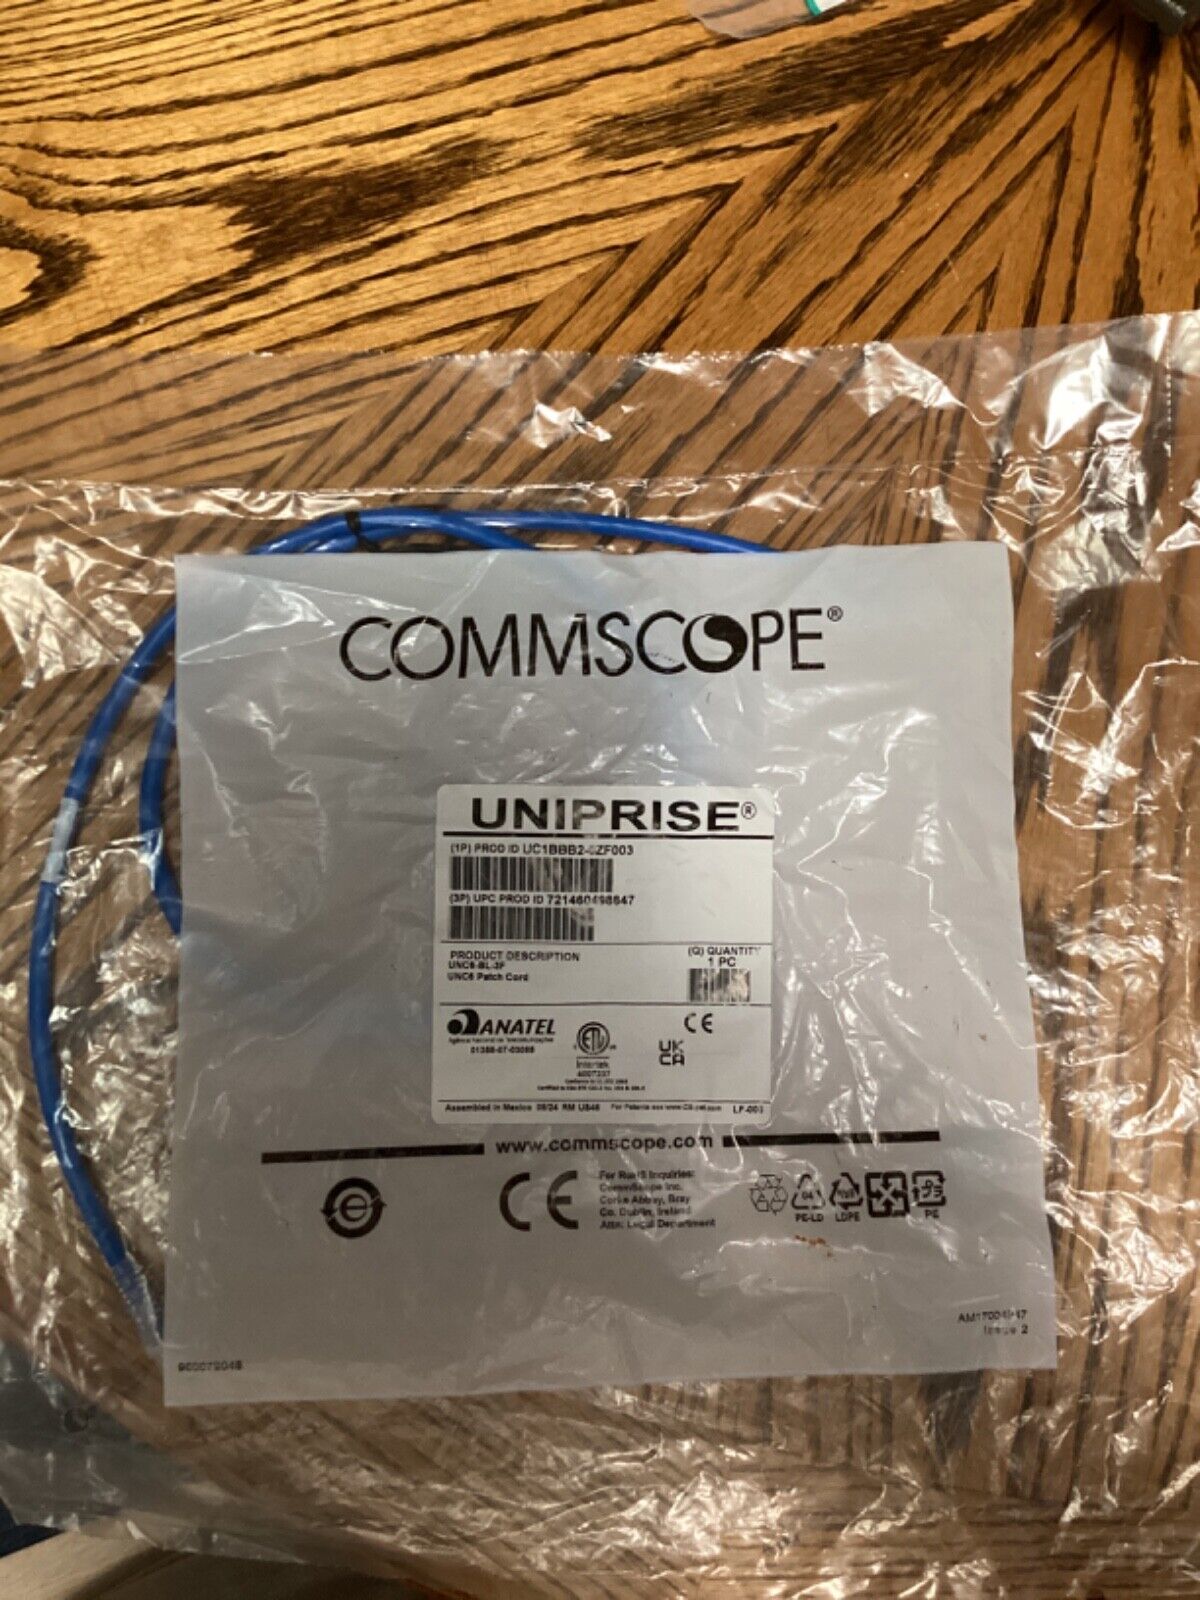 CommScope CAT 6 Patch Cord UNC6-BL-3F Blue 3 Feet Cable CC0062521/1 - [Lot of 13